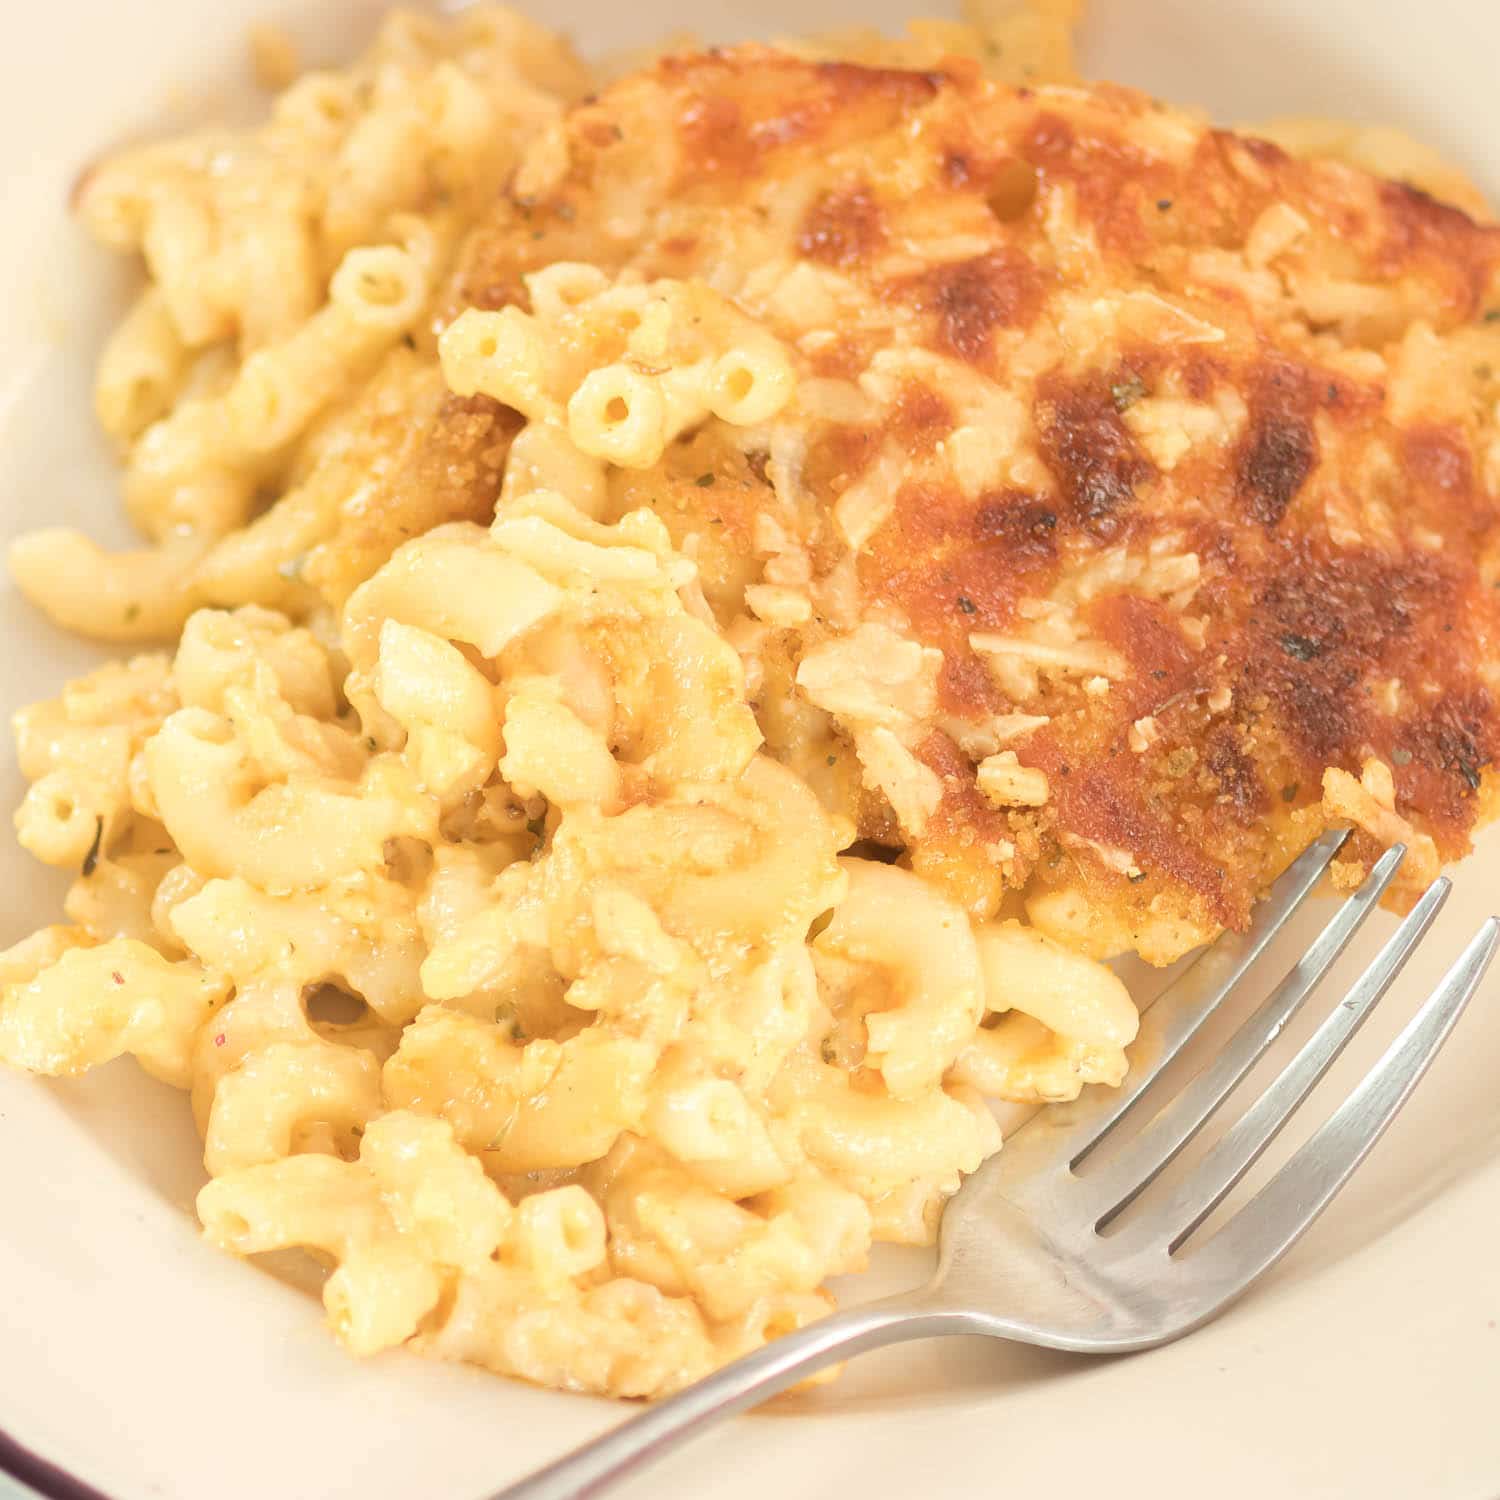 Baked Macaroni and Cheese - Crispy Top Mac and Cheese